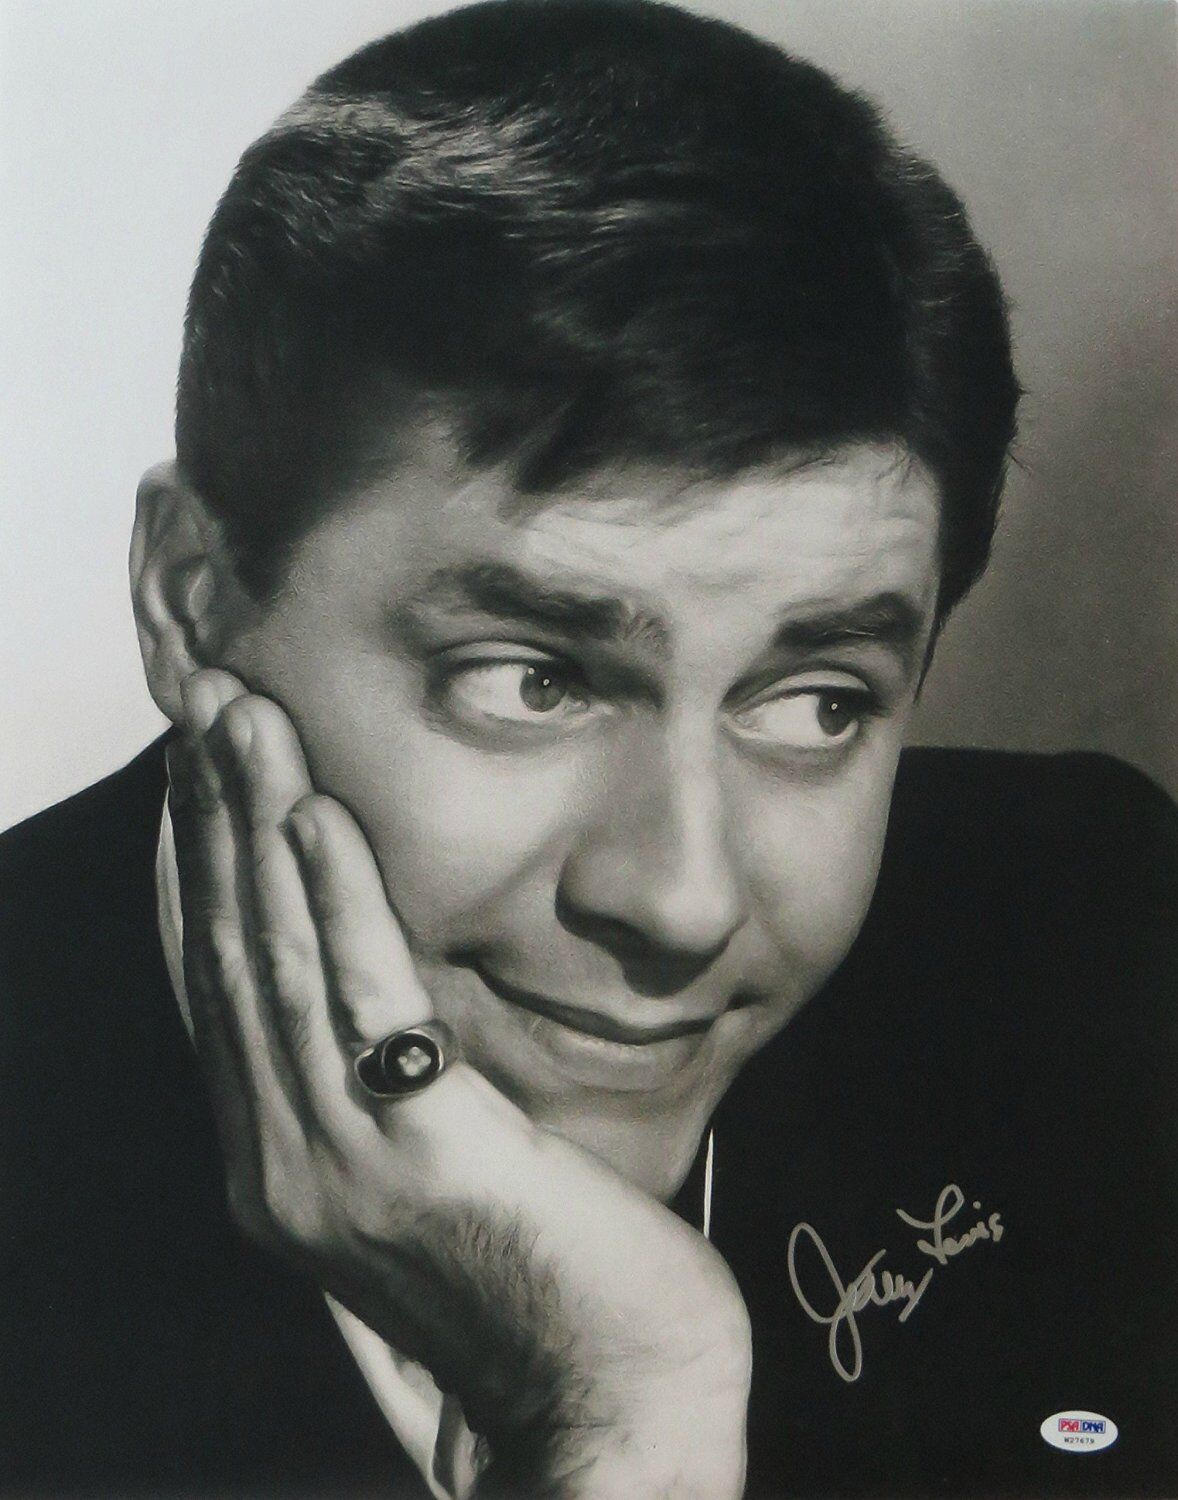 Jerry Lewis Signed Authentic Autographed 16x20 Photo Poster painting PSA/DNA #W27679